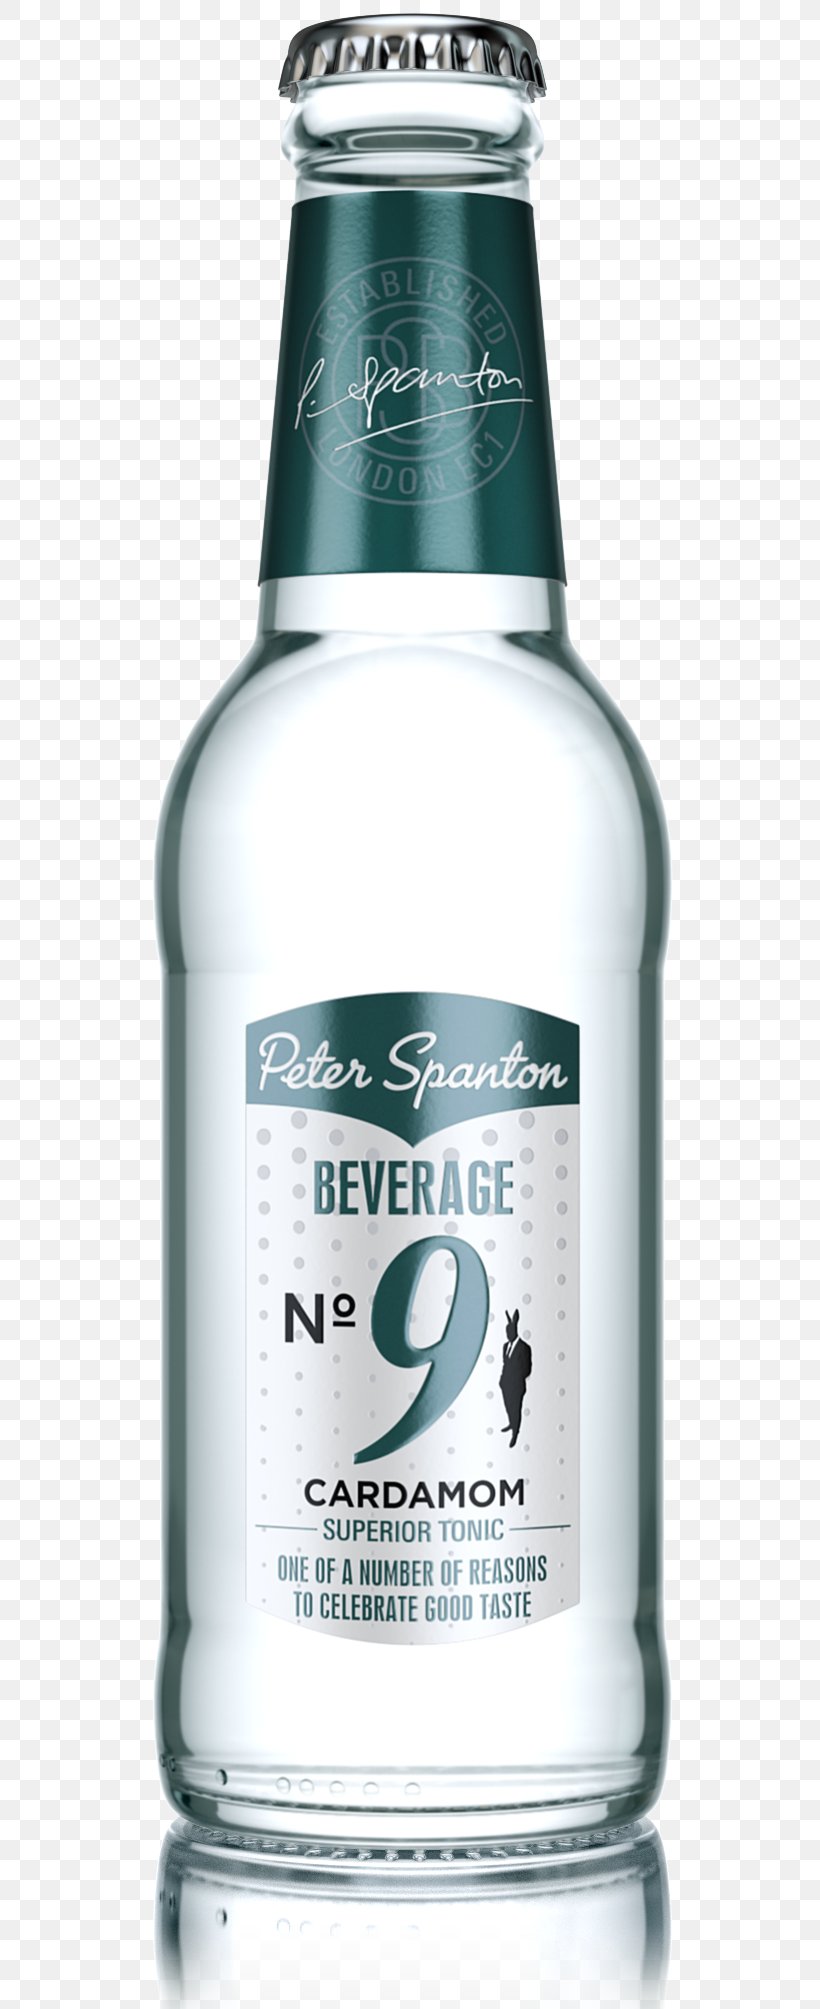 Tonic Water Gin And Tonic Fizzy Drinks Peter Spanton Drinks, PNG, 635x2009px, Tonic Water, Alcoholic Beverage, Beer Bottle, Bitters, Bottle Download Free